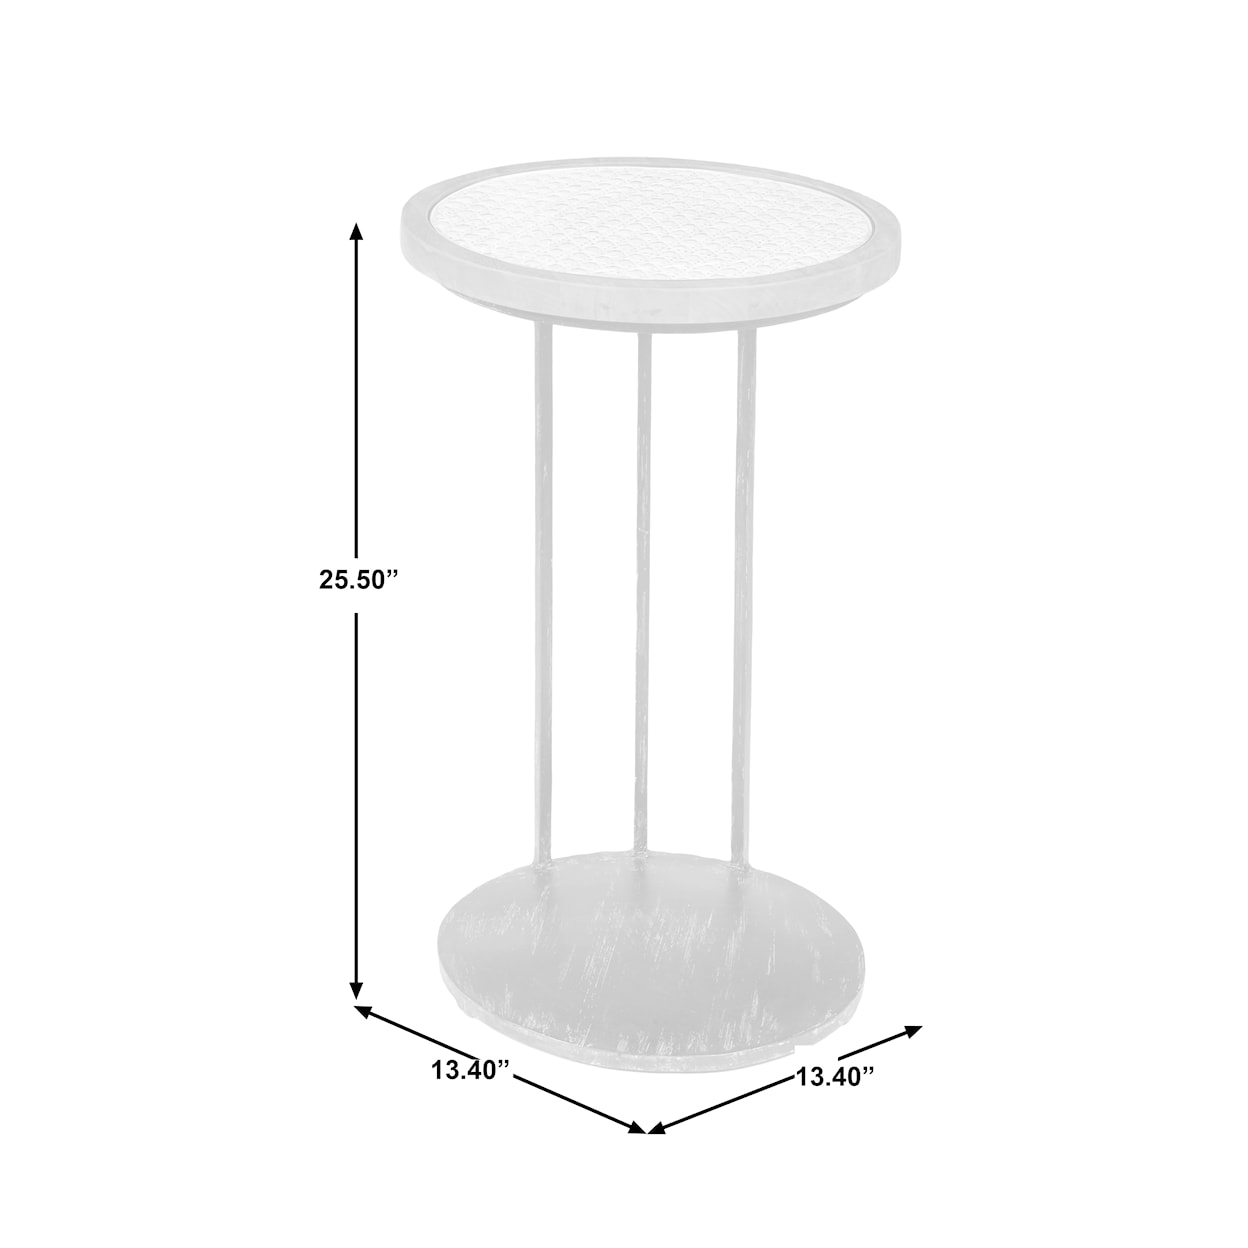 Accentrics Home Accents Side Table with Cane and Glass Top